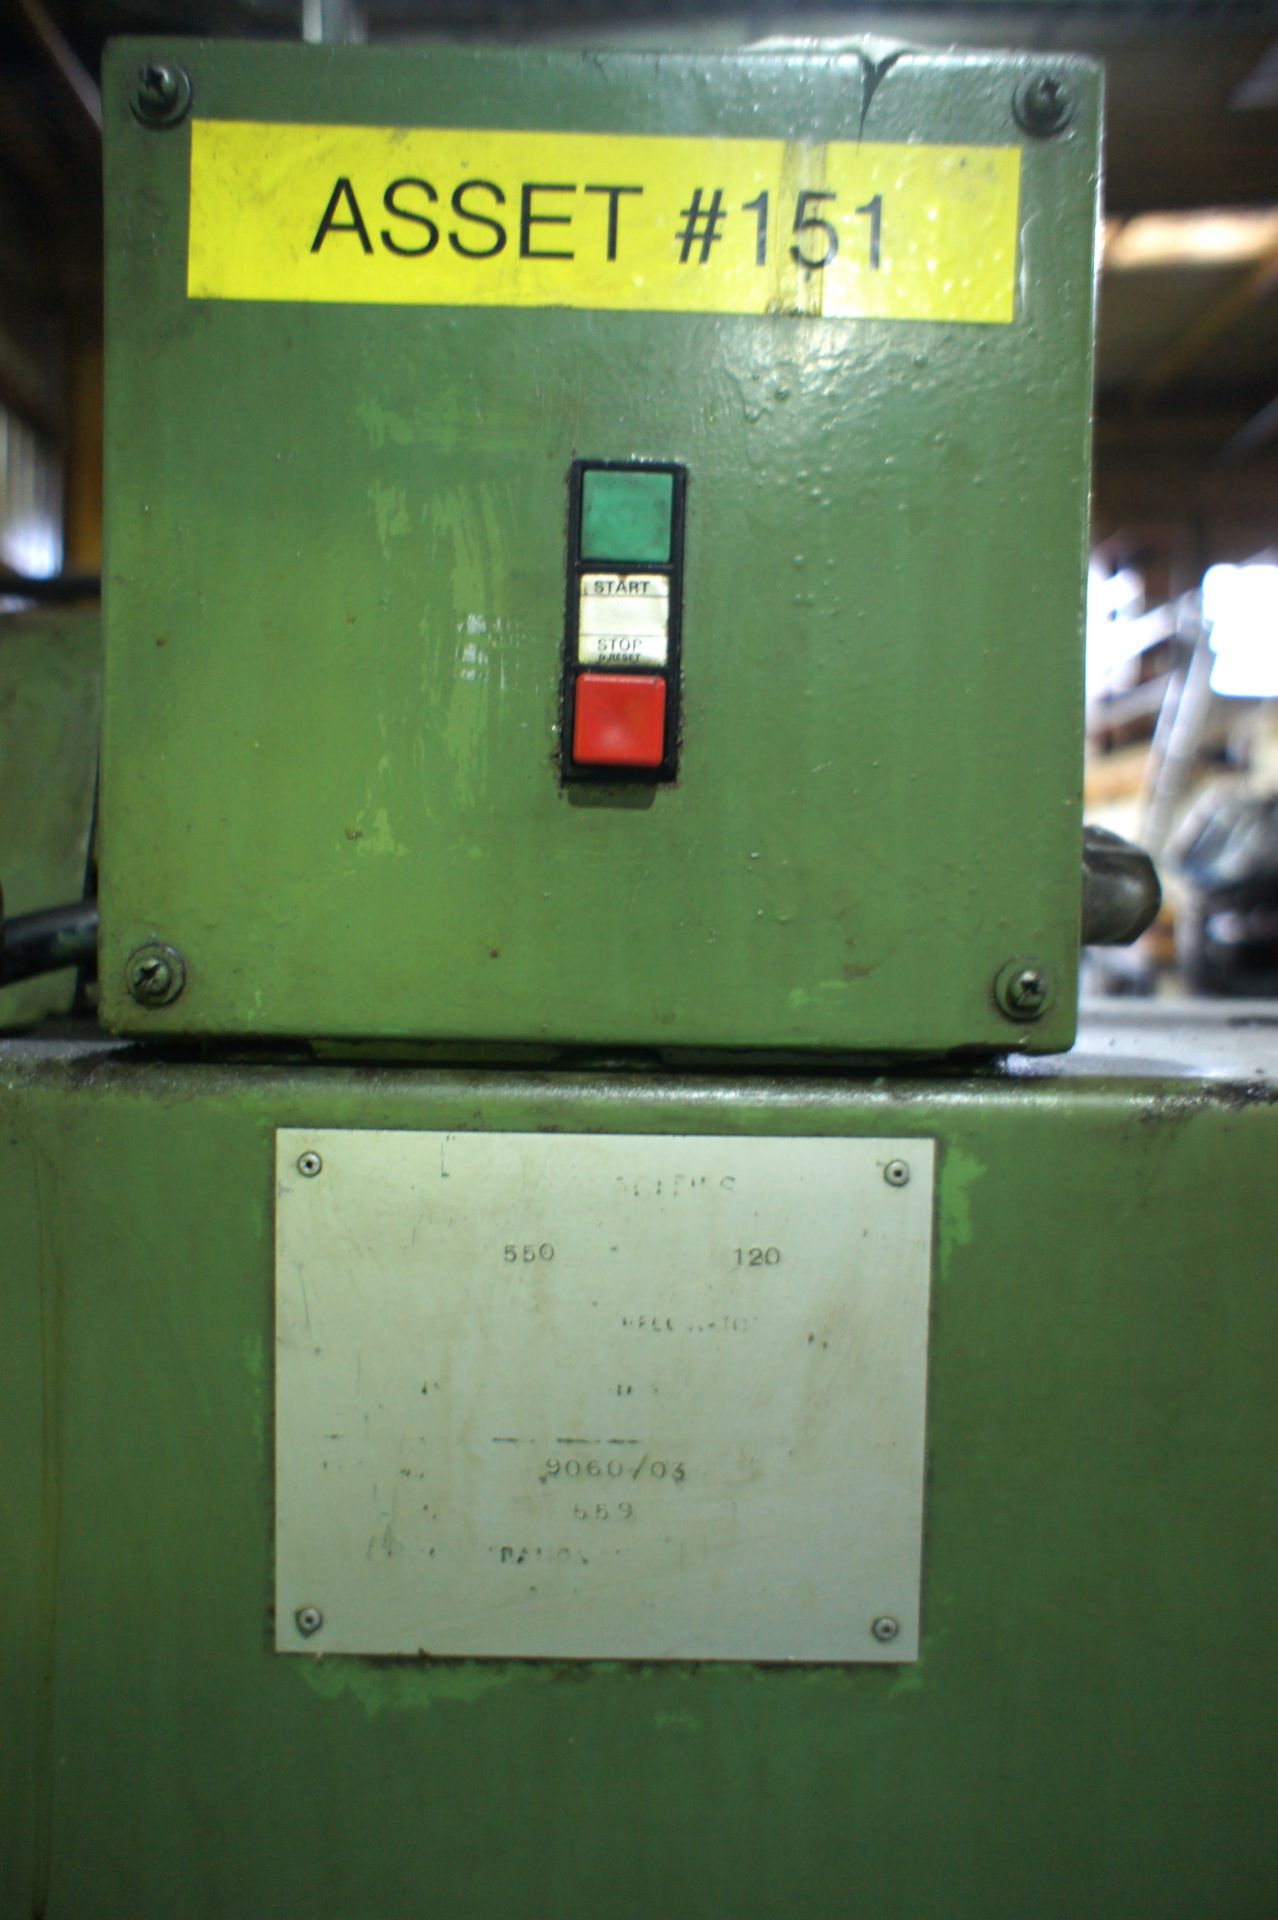 Darenth swarf processing / coolant recovery system, Serial no. 9060/03 (asset no. 151)   Please - Image 3 of 5